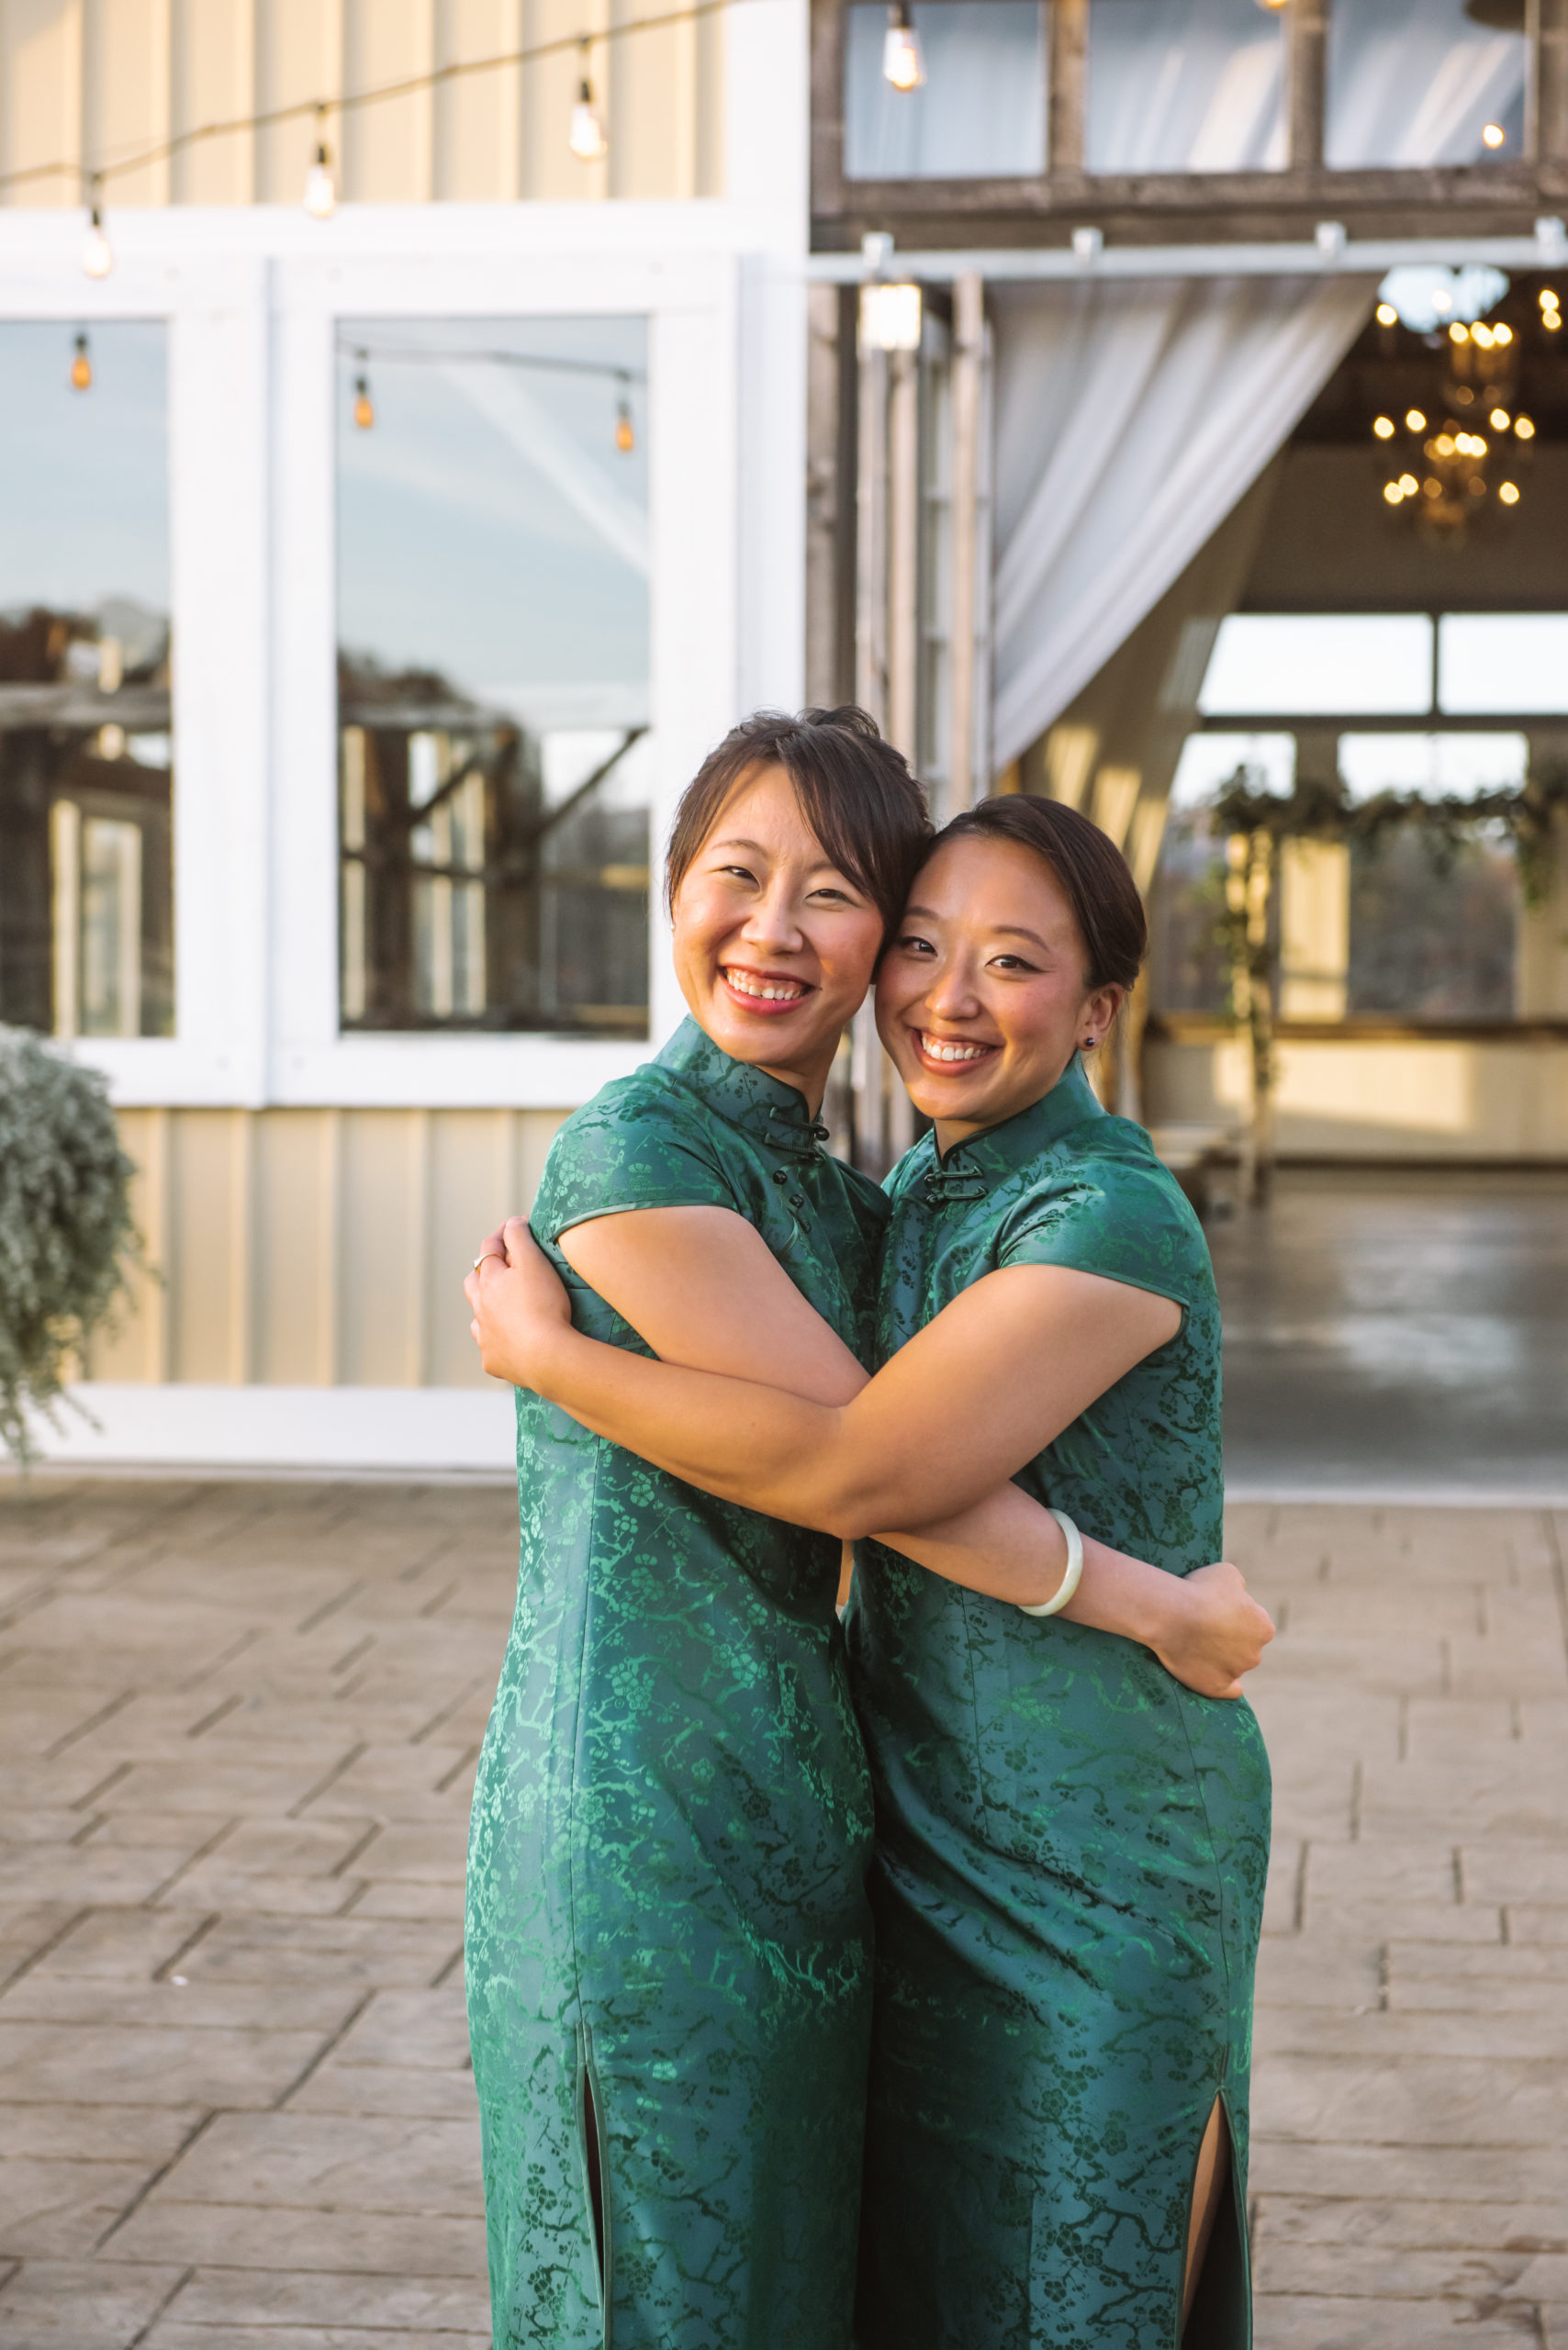 Two women who are part of the wedding party, dressed in dark green qi paos, facing one another with their heads turned to look directly at the camera. Their arms are wrapped around one another in a hug and they are both smiling. They are standing in the stone courtyard area in front of the ceremony location.